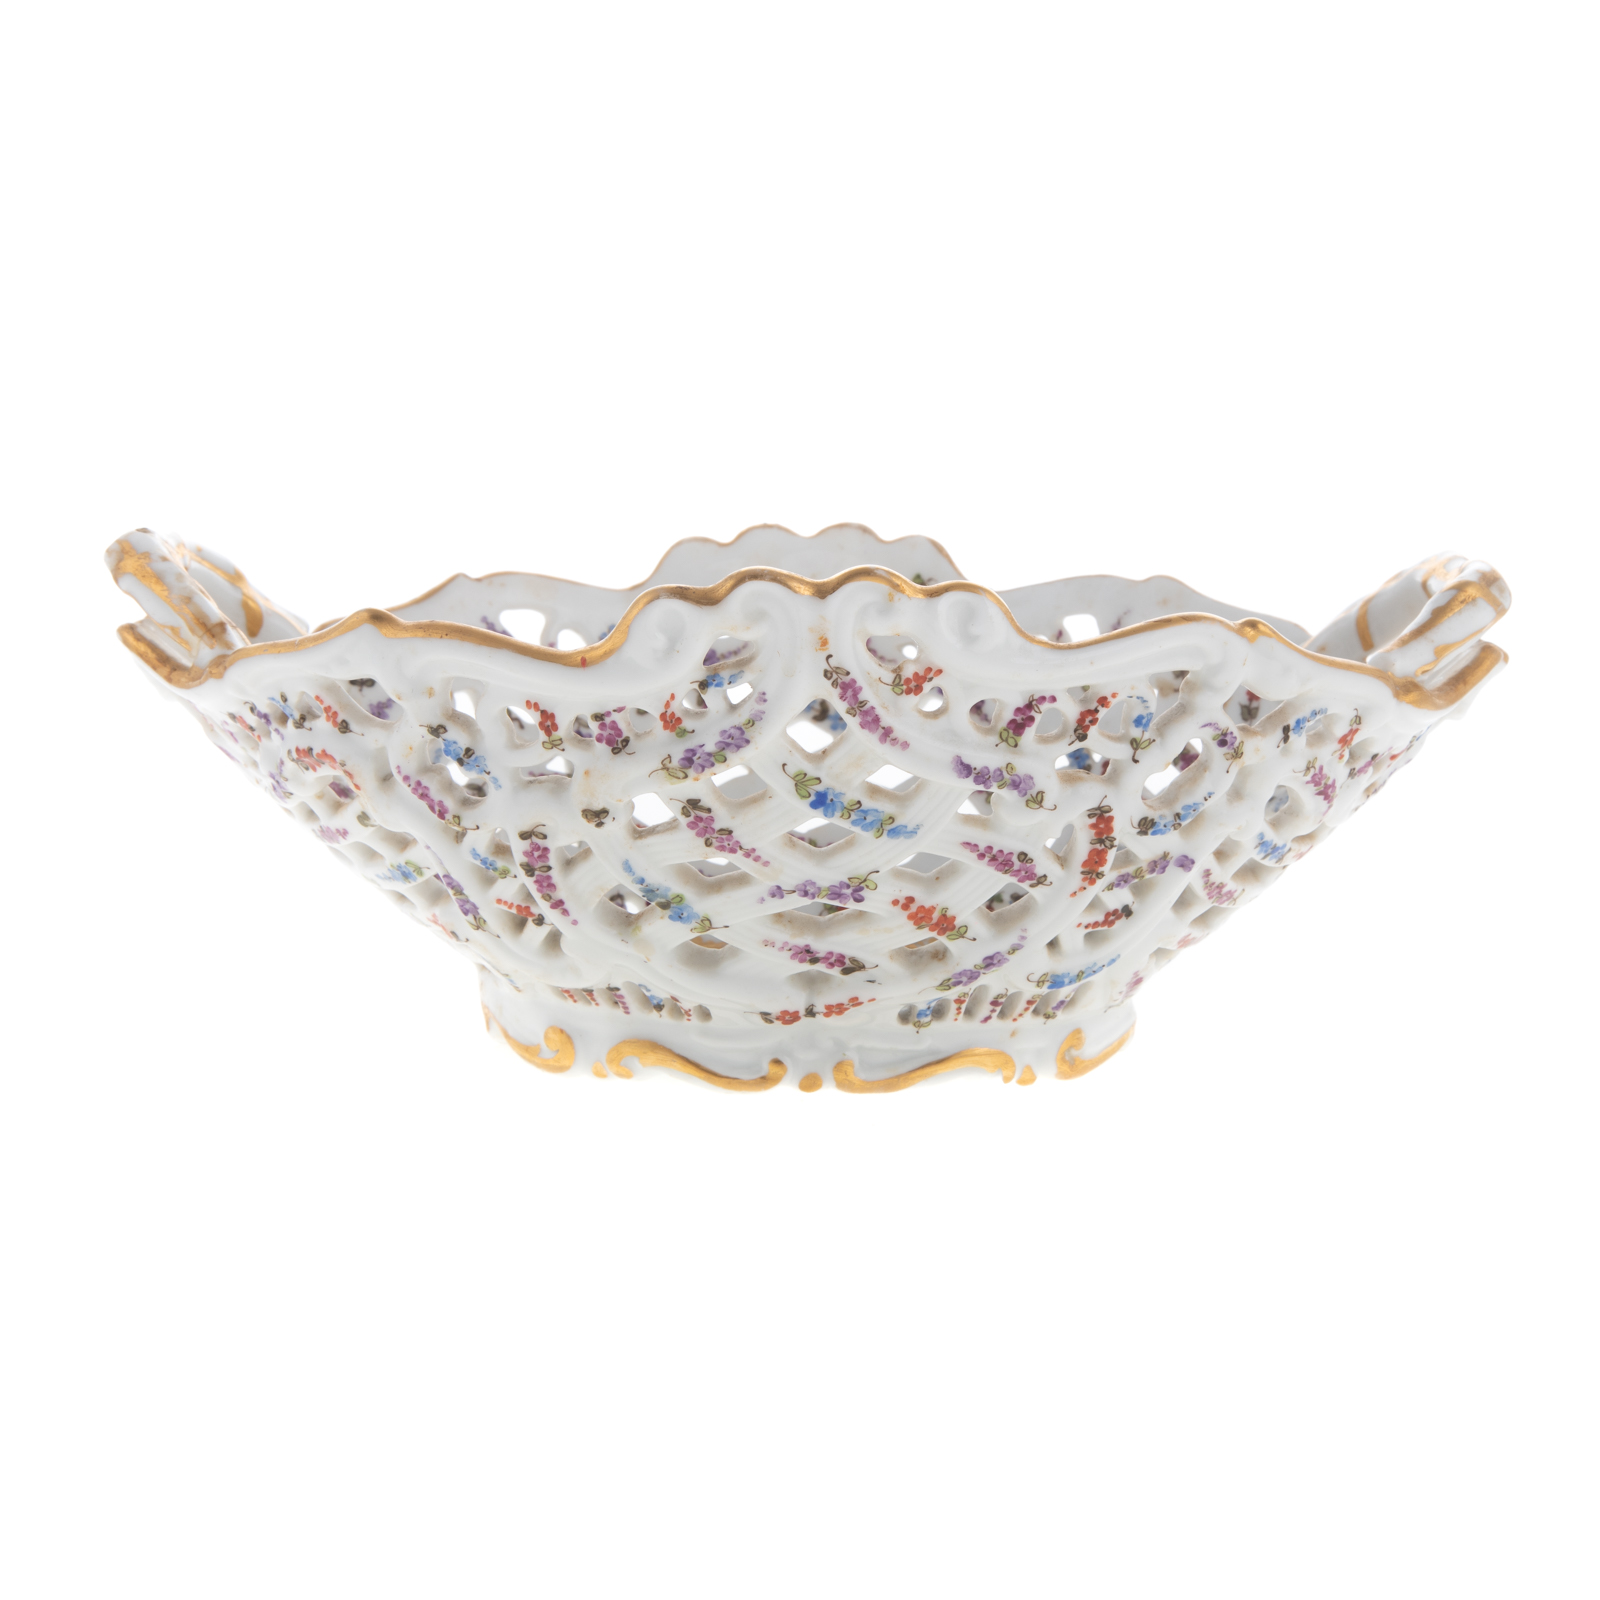 MEISSEN PORCELAIN RETICULATED BERRY 29e6b2